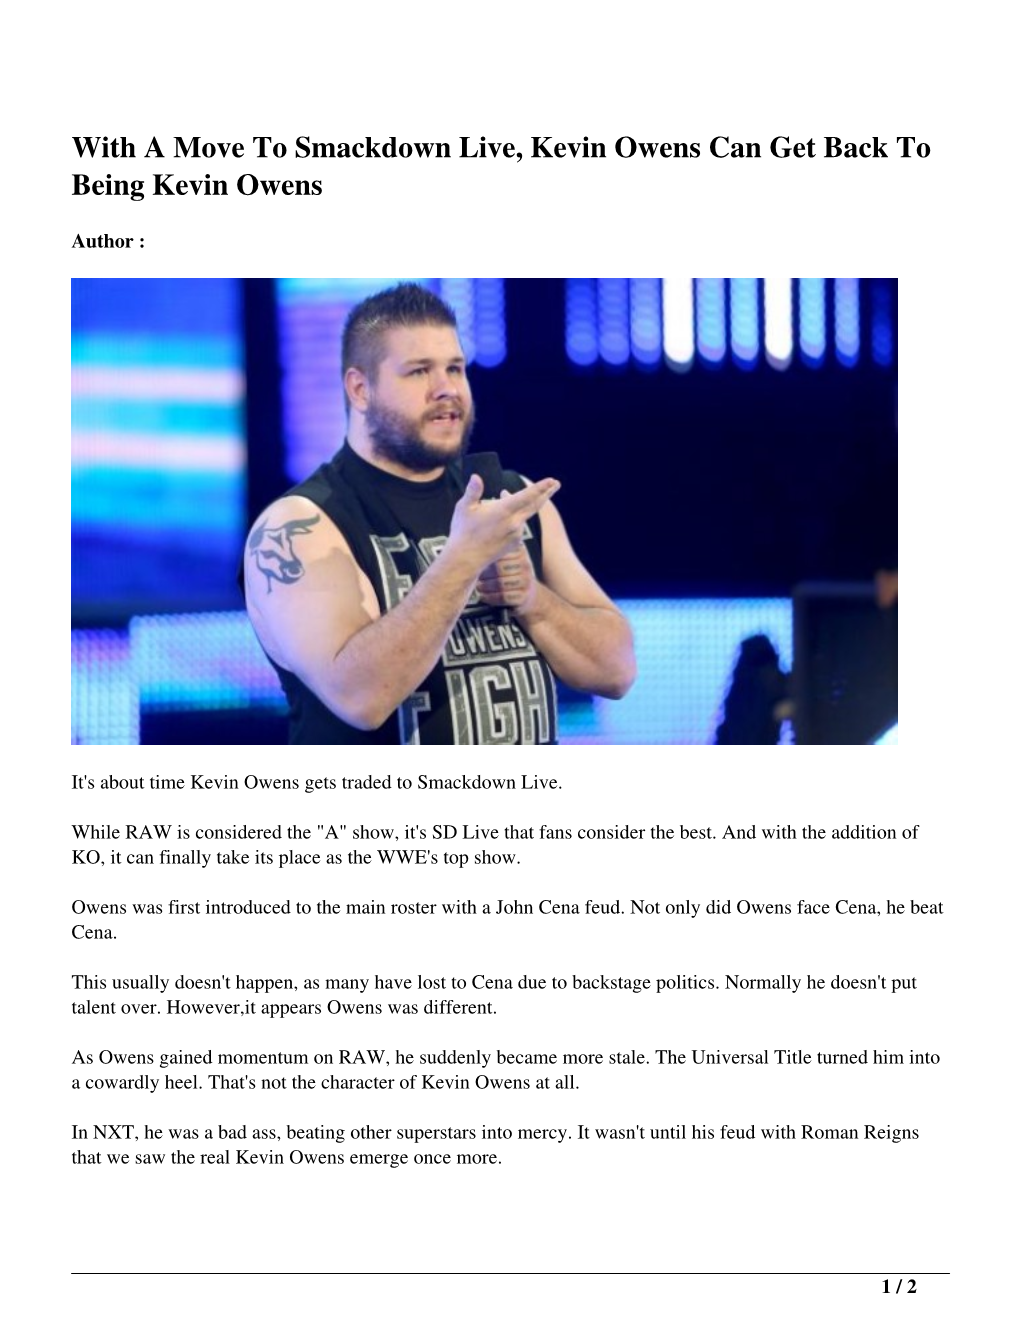 With a Move to Smackdown Live, Kevin Owens Can Get Back to Being Kevin Owens